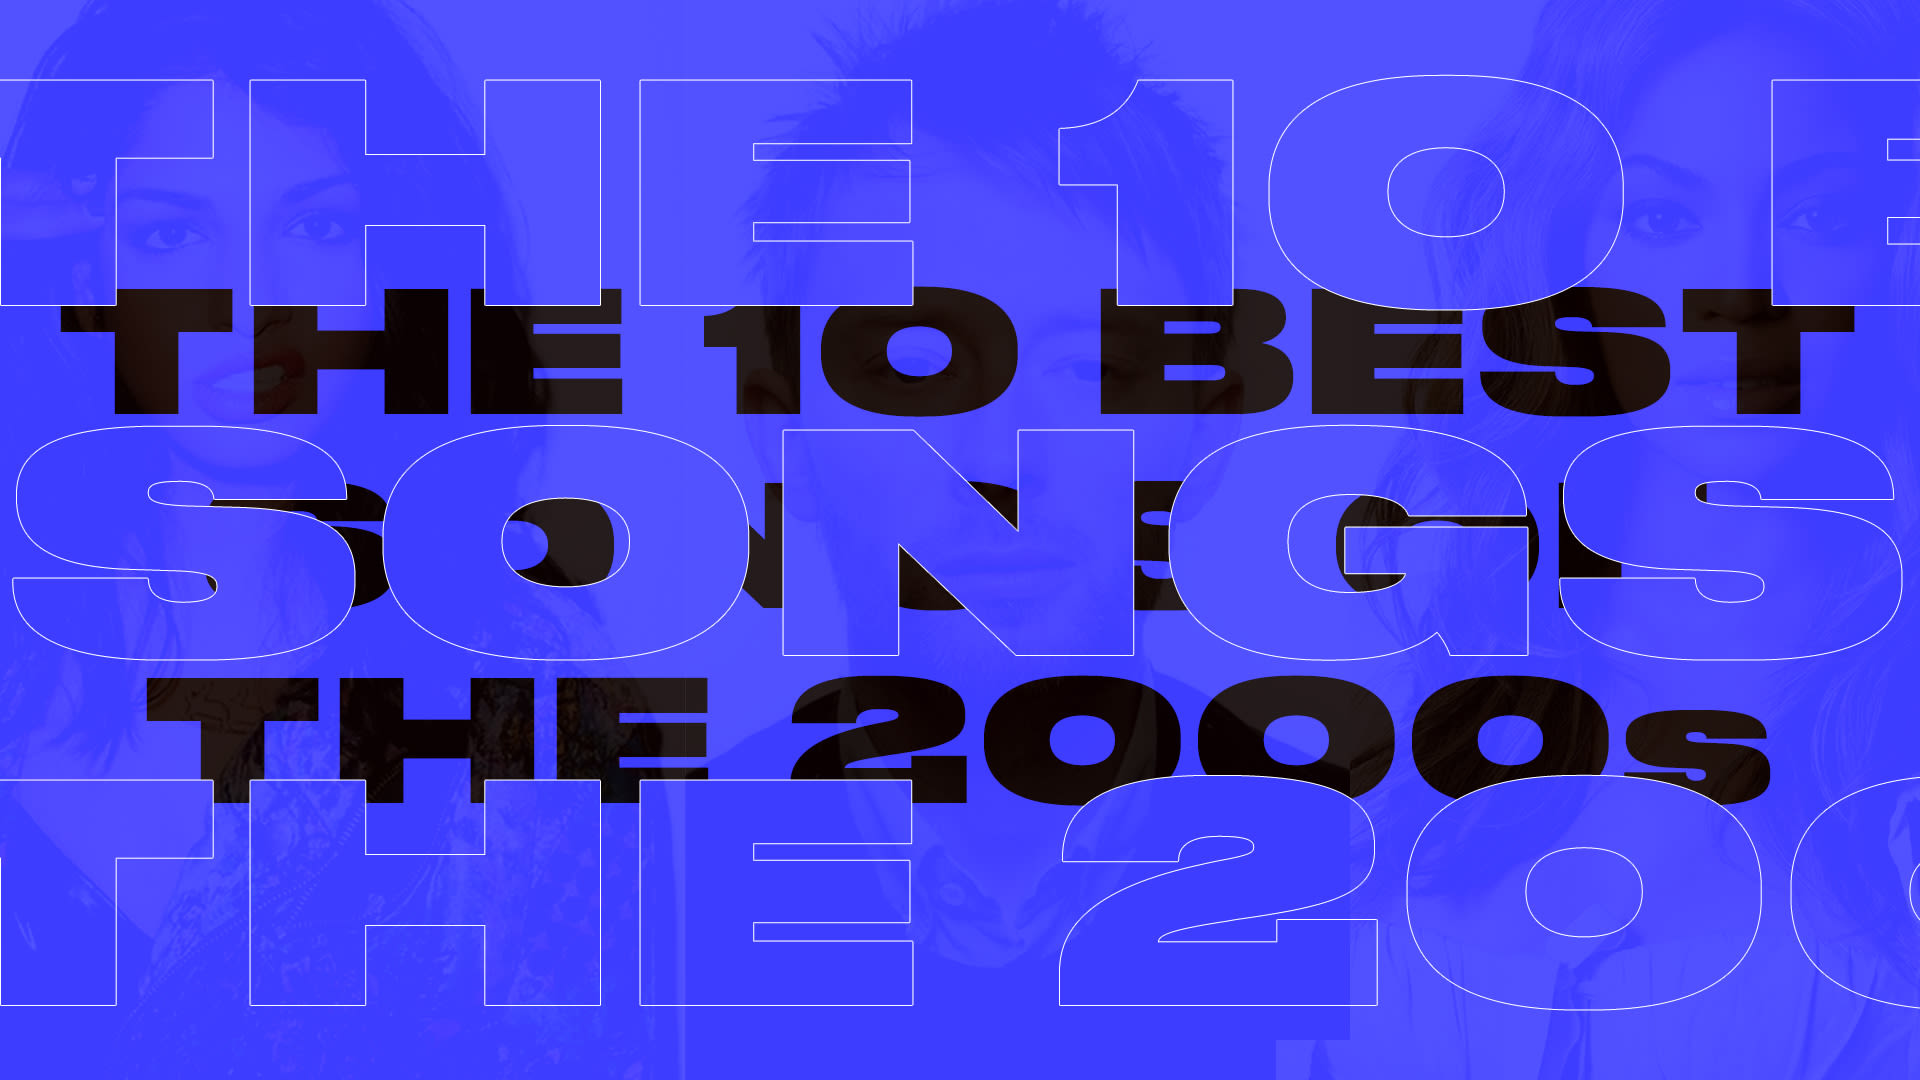 12 00 музыка. 2000s Songs. Pitchfork's 33 best Industrial albums of all time.